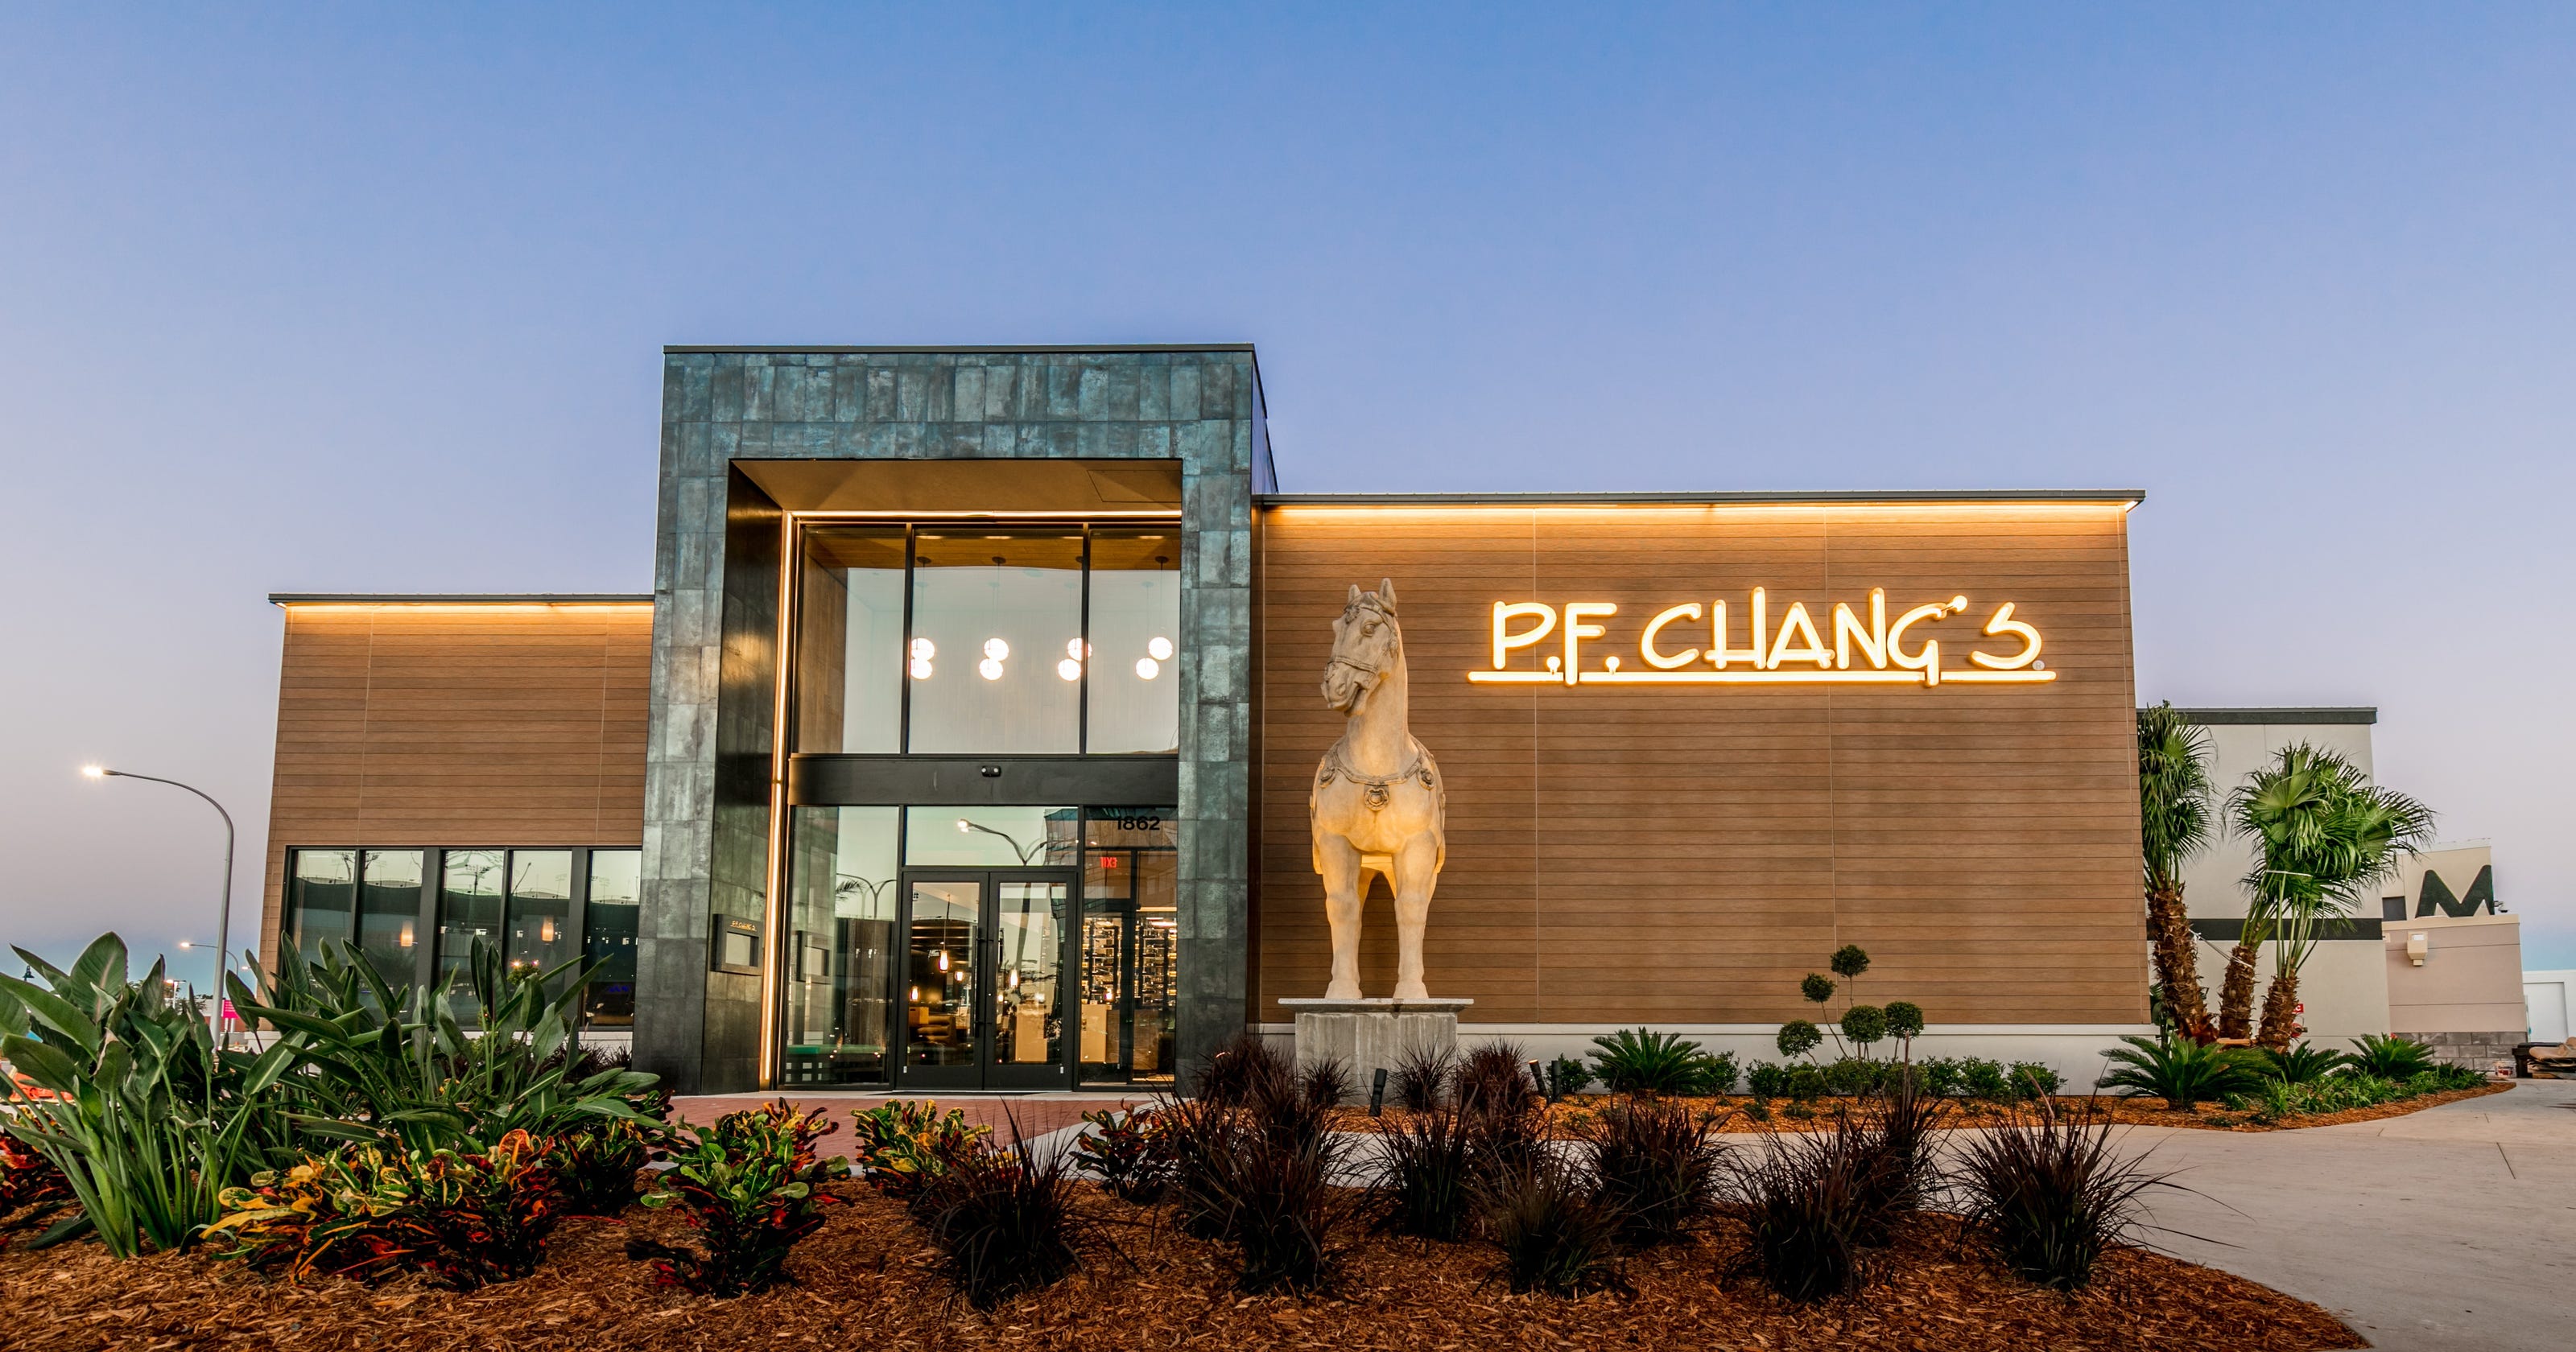 P F Chang S To Open In Appleton Area Fox River Mall The Buzz